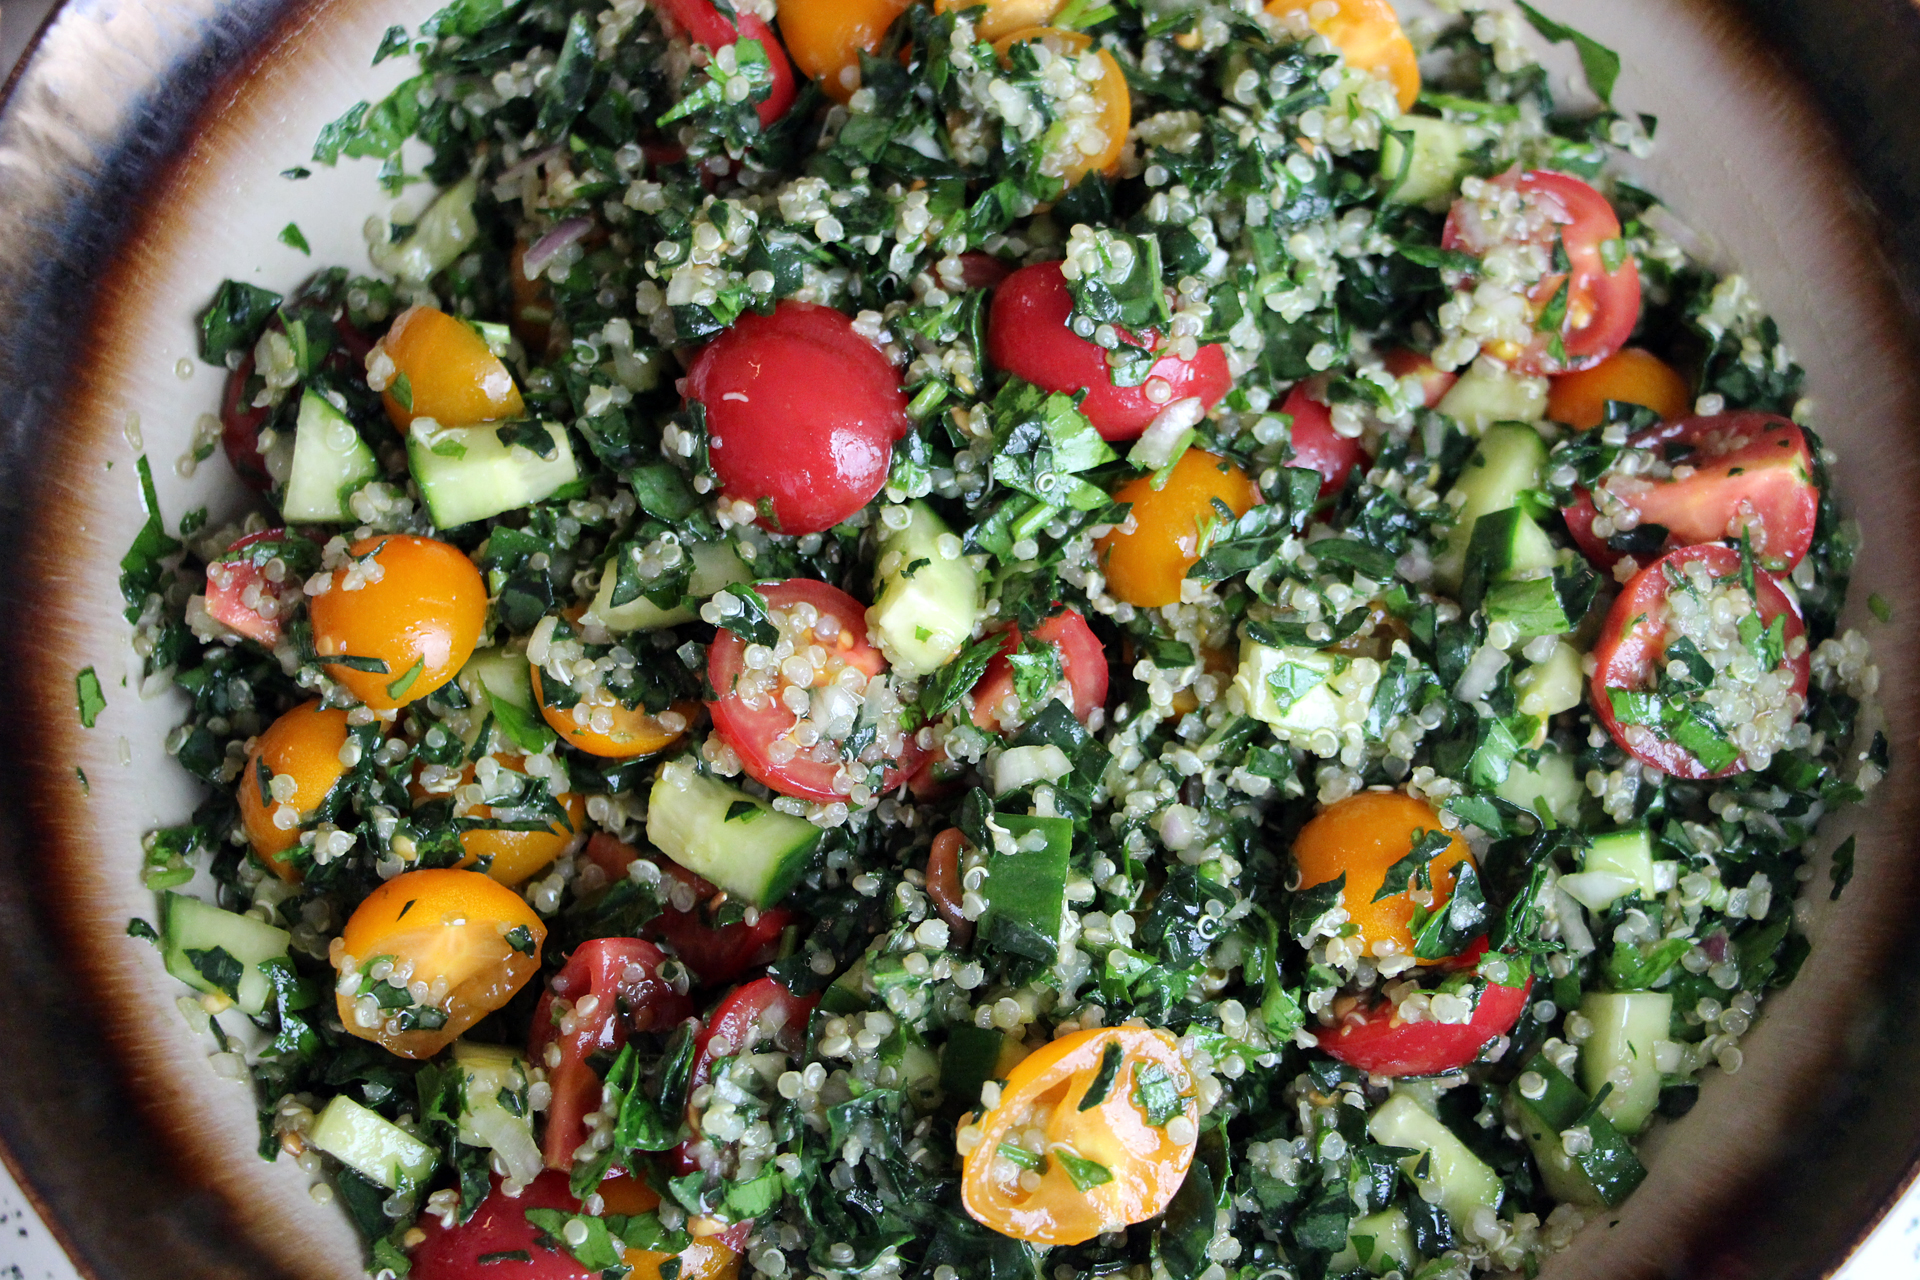 Mediterranean-Style Kale and Quinoa Tabouli with Cherry Tomatoes and Lemon